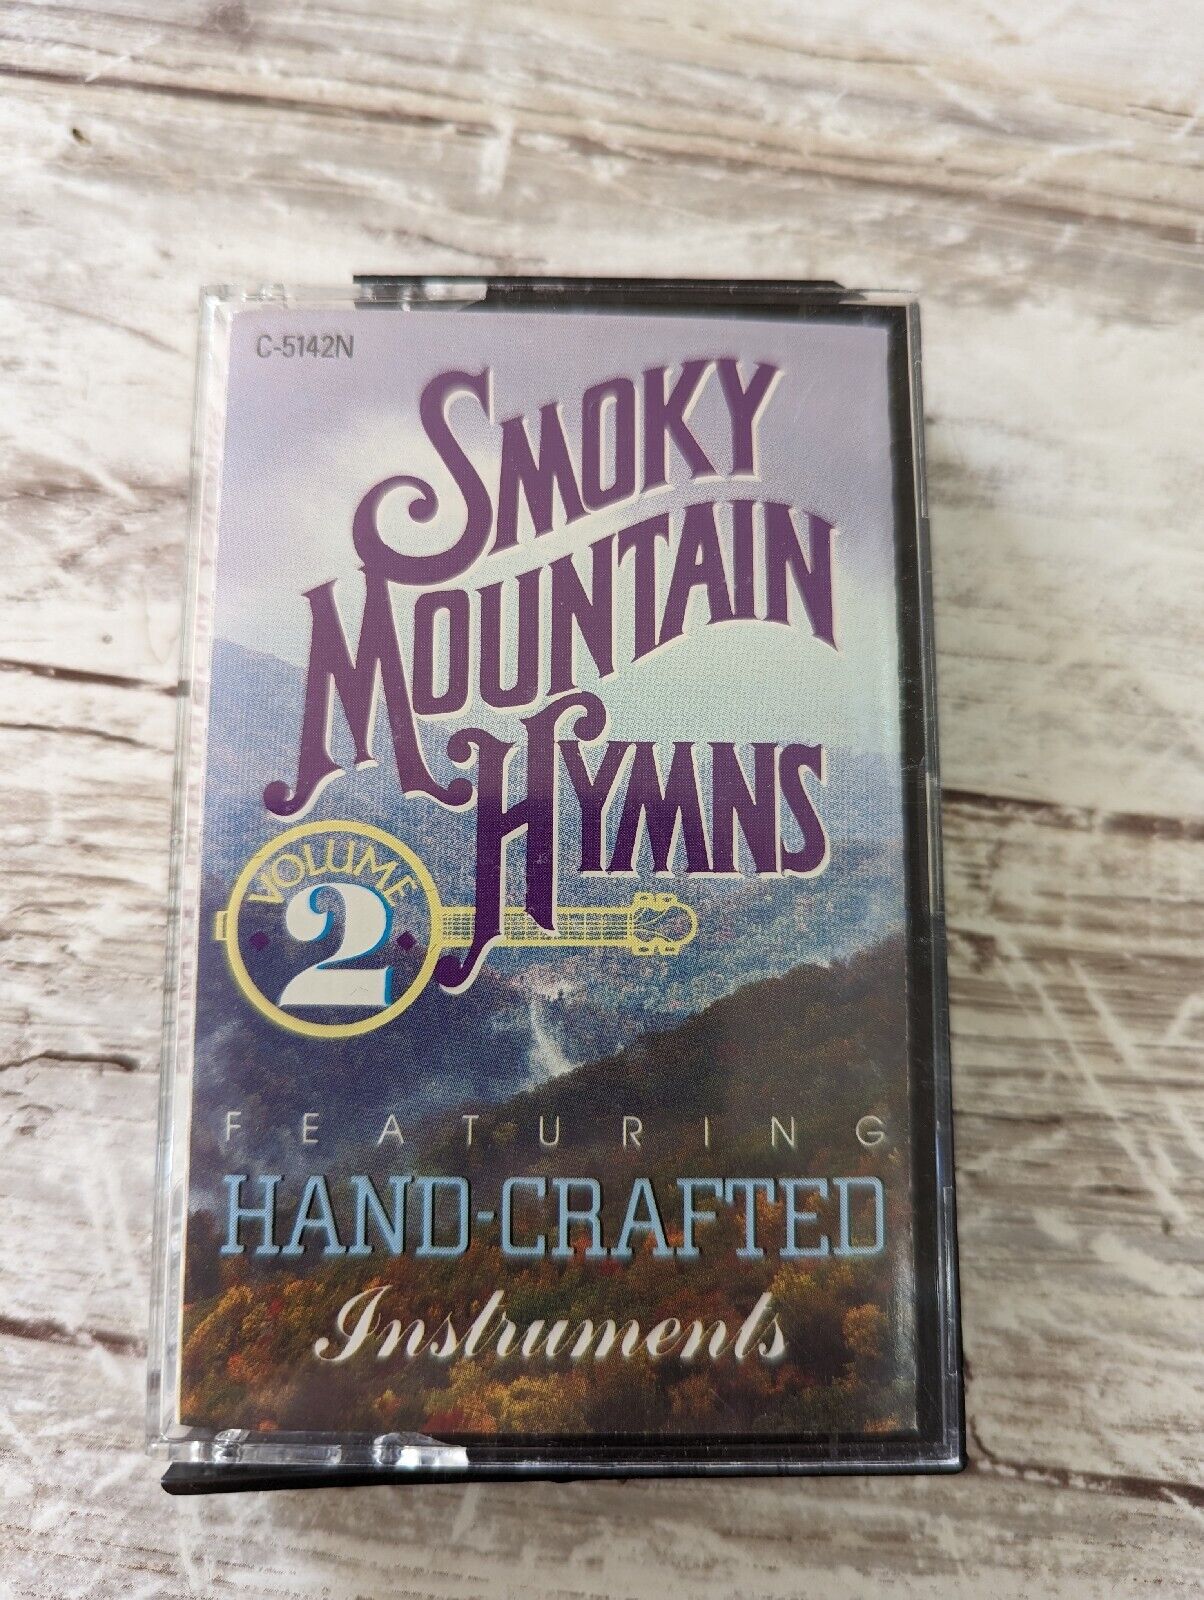 Smoky Mountain Hymns Vol. 2 Featuring Hand Crafted Instruments CASSETTE 1990